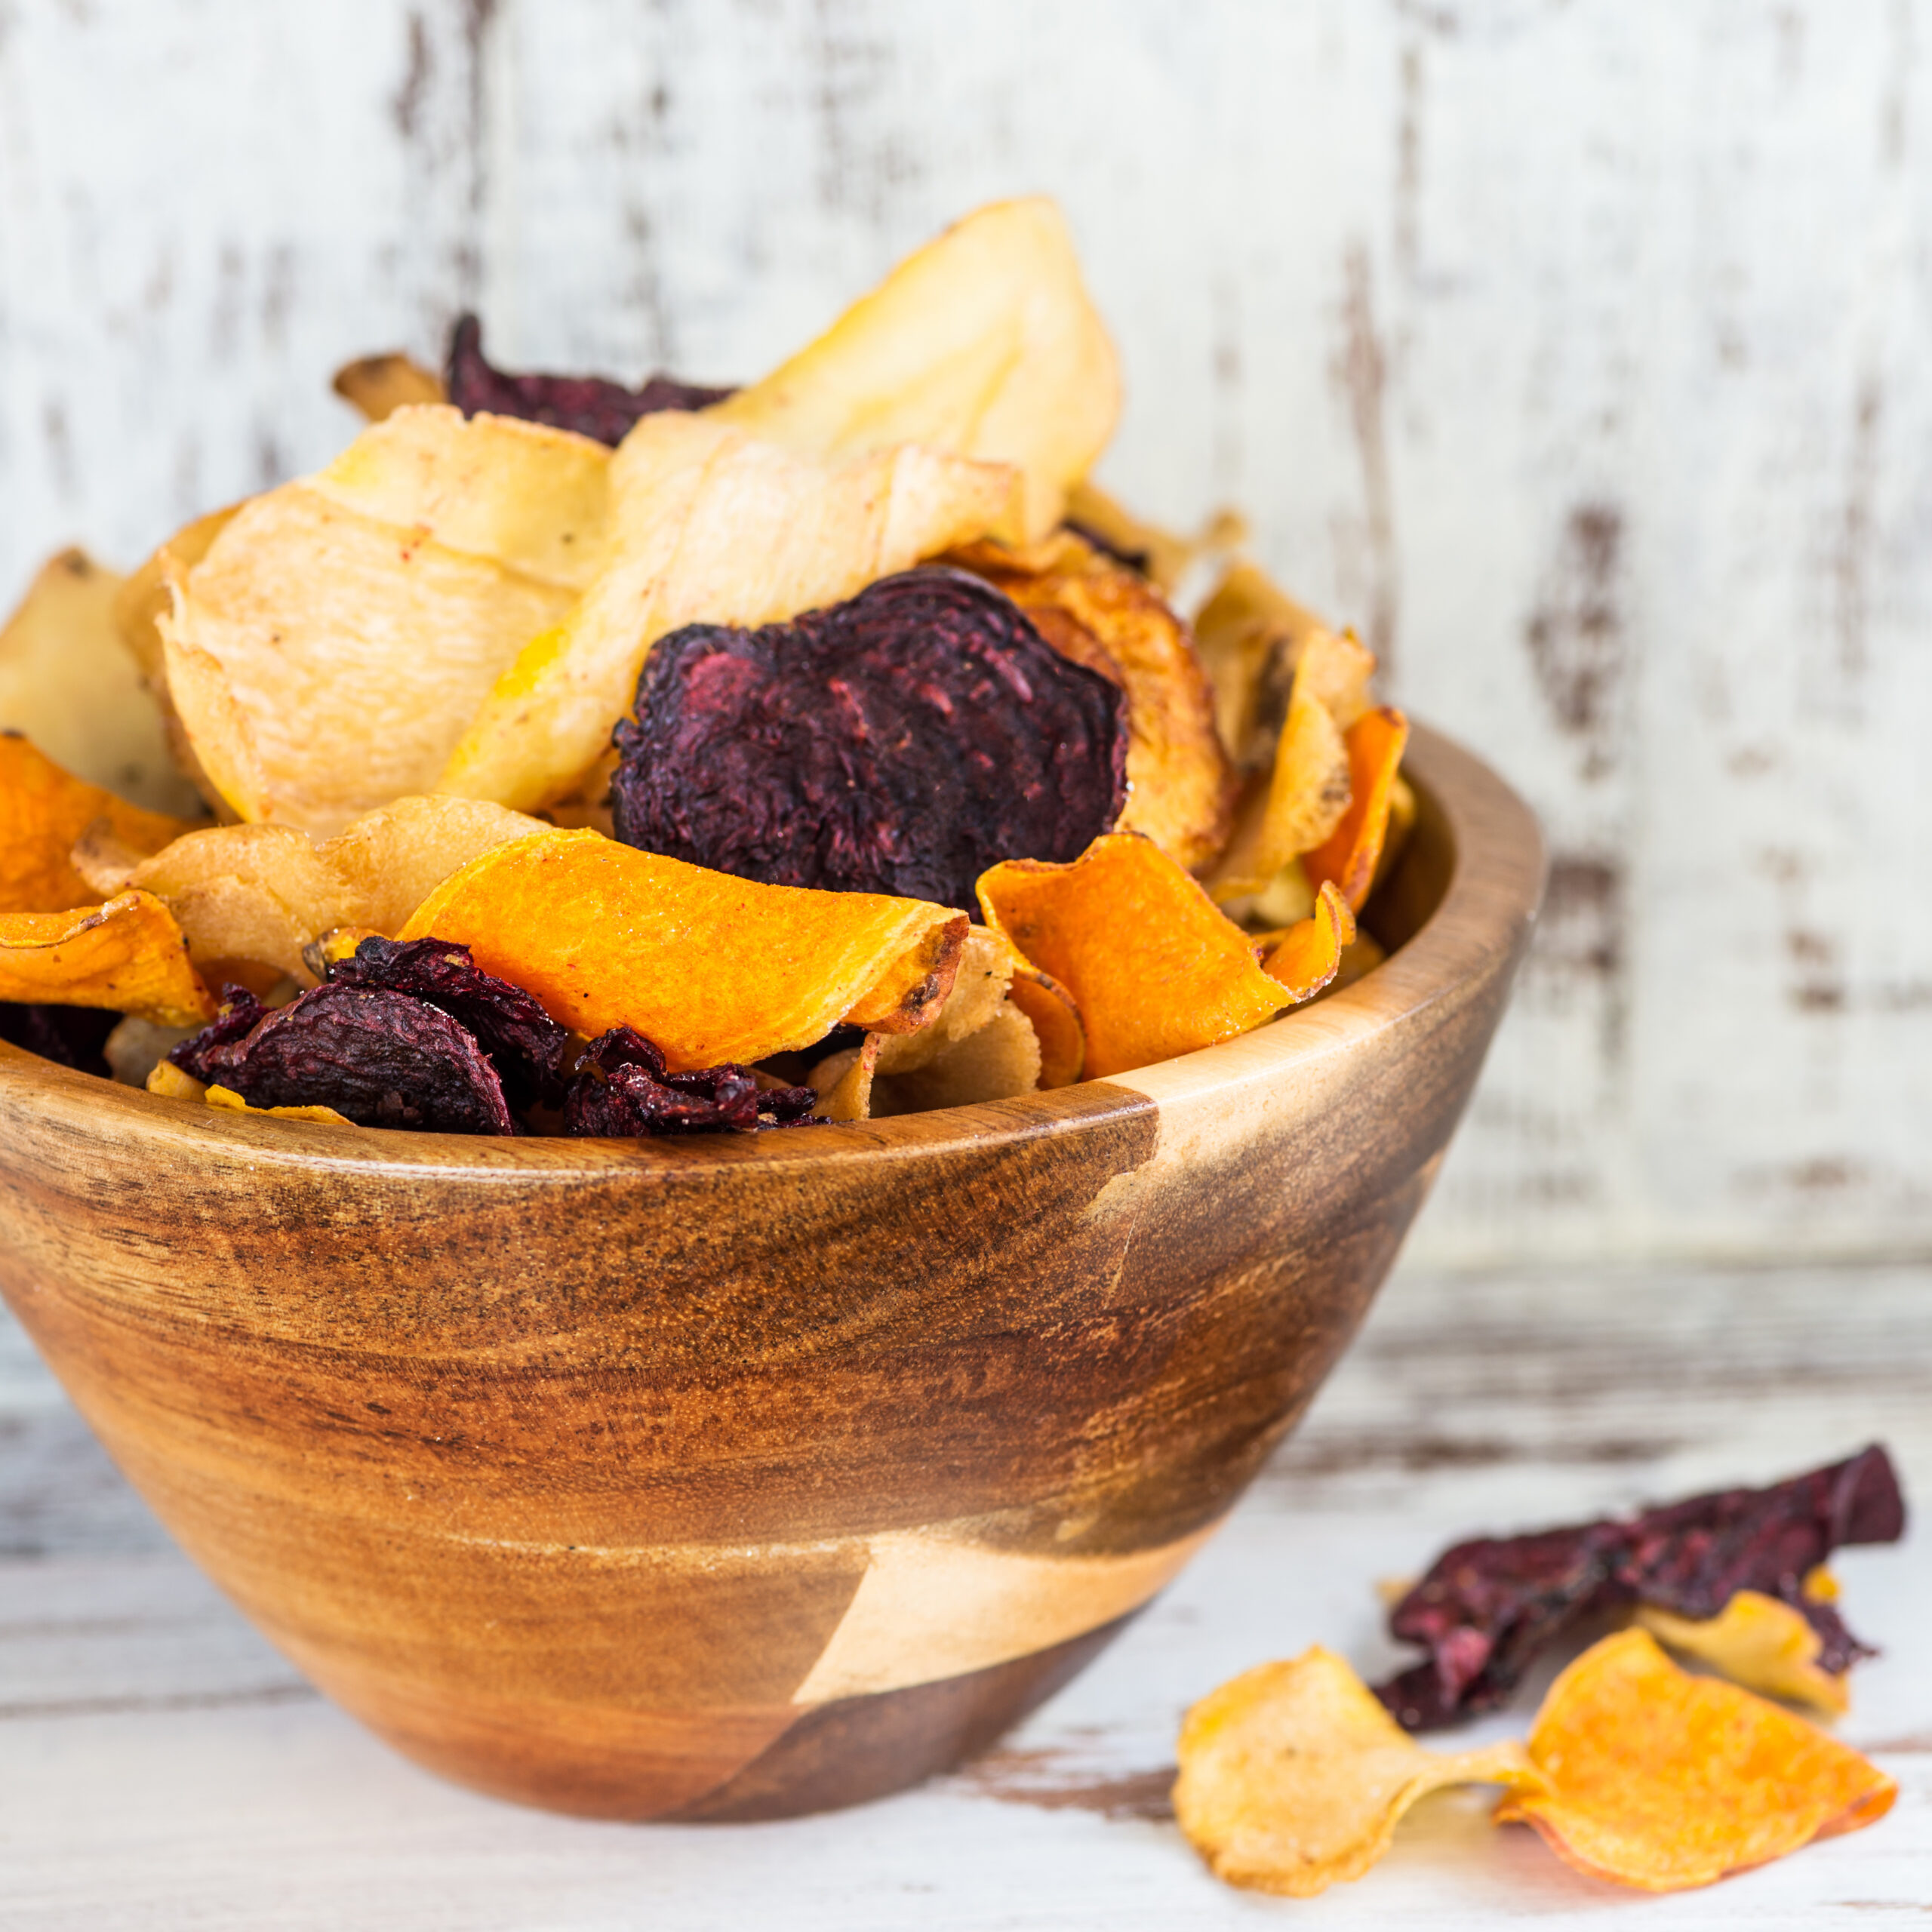 Bowl of Healthy Snack from Vegetable Chips, such as Sweet Potato, Beetroot, Carrot, Parsnip on Light Wooden Background